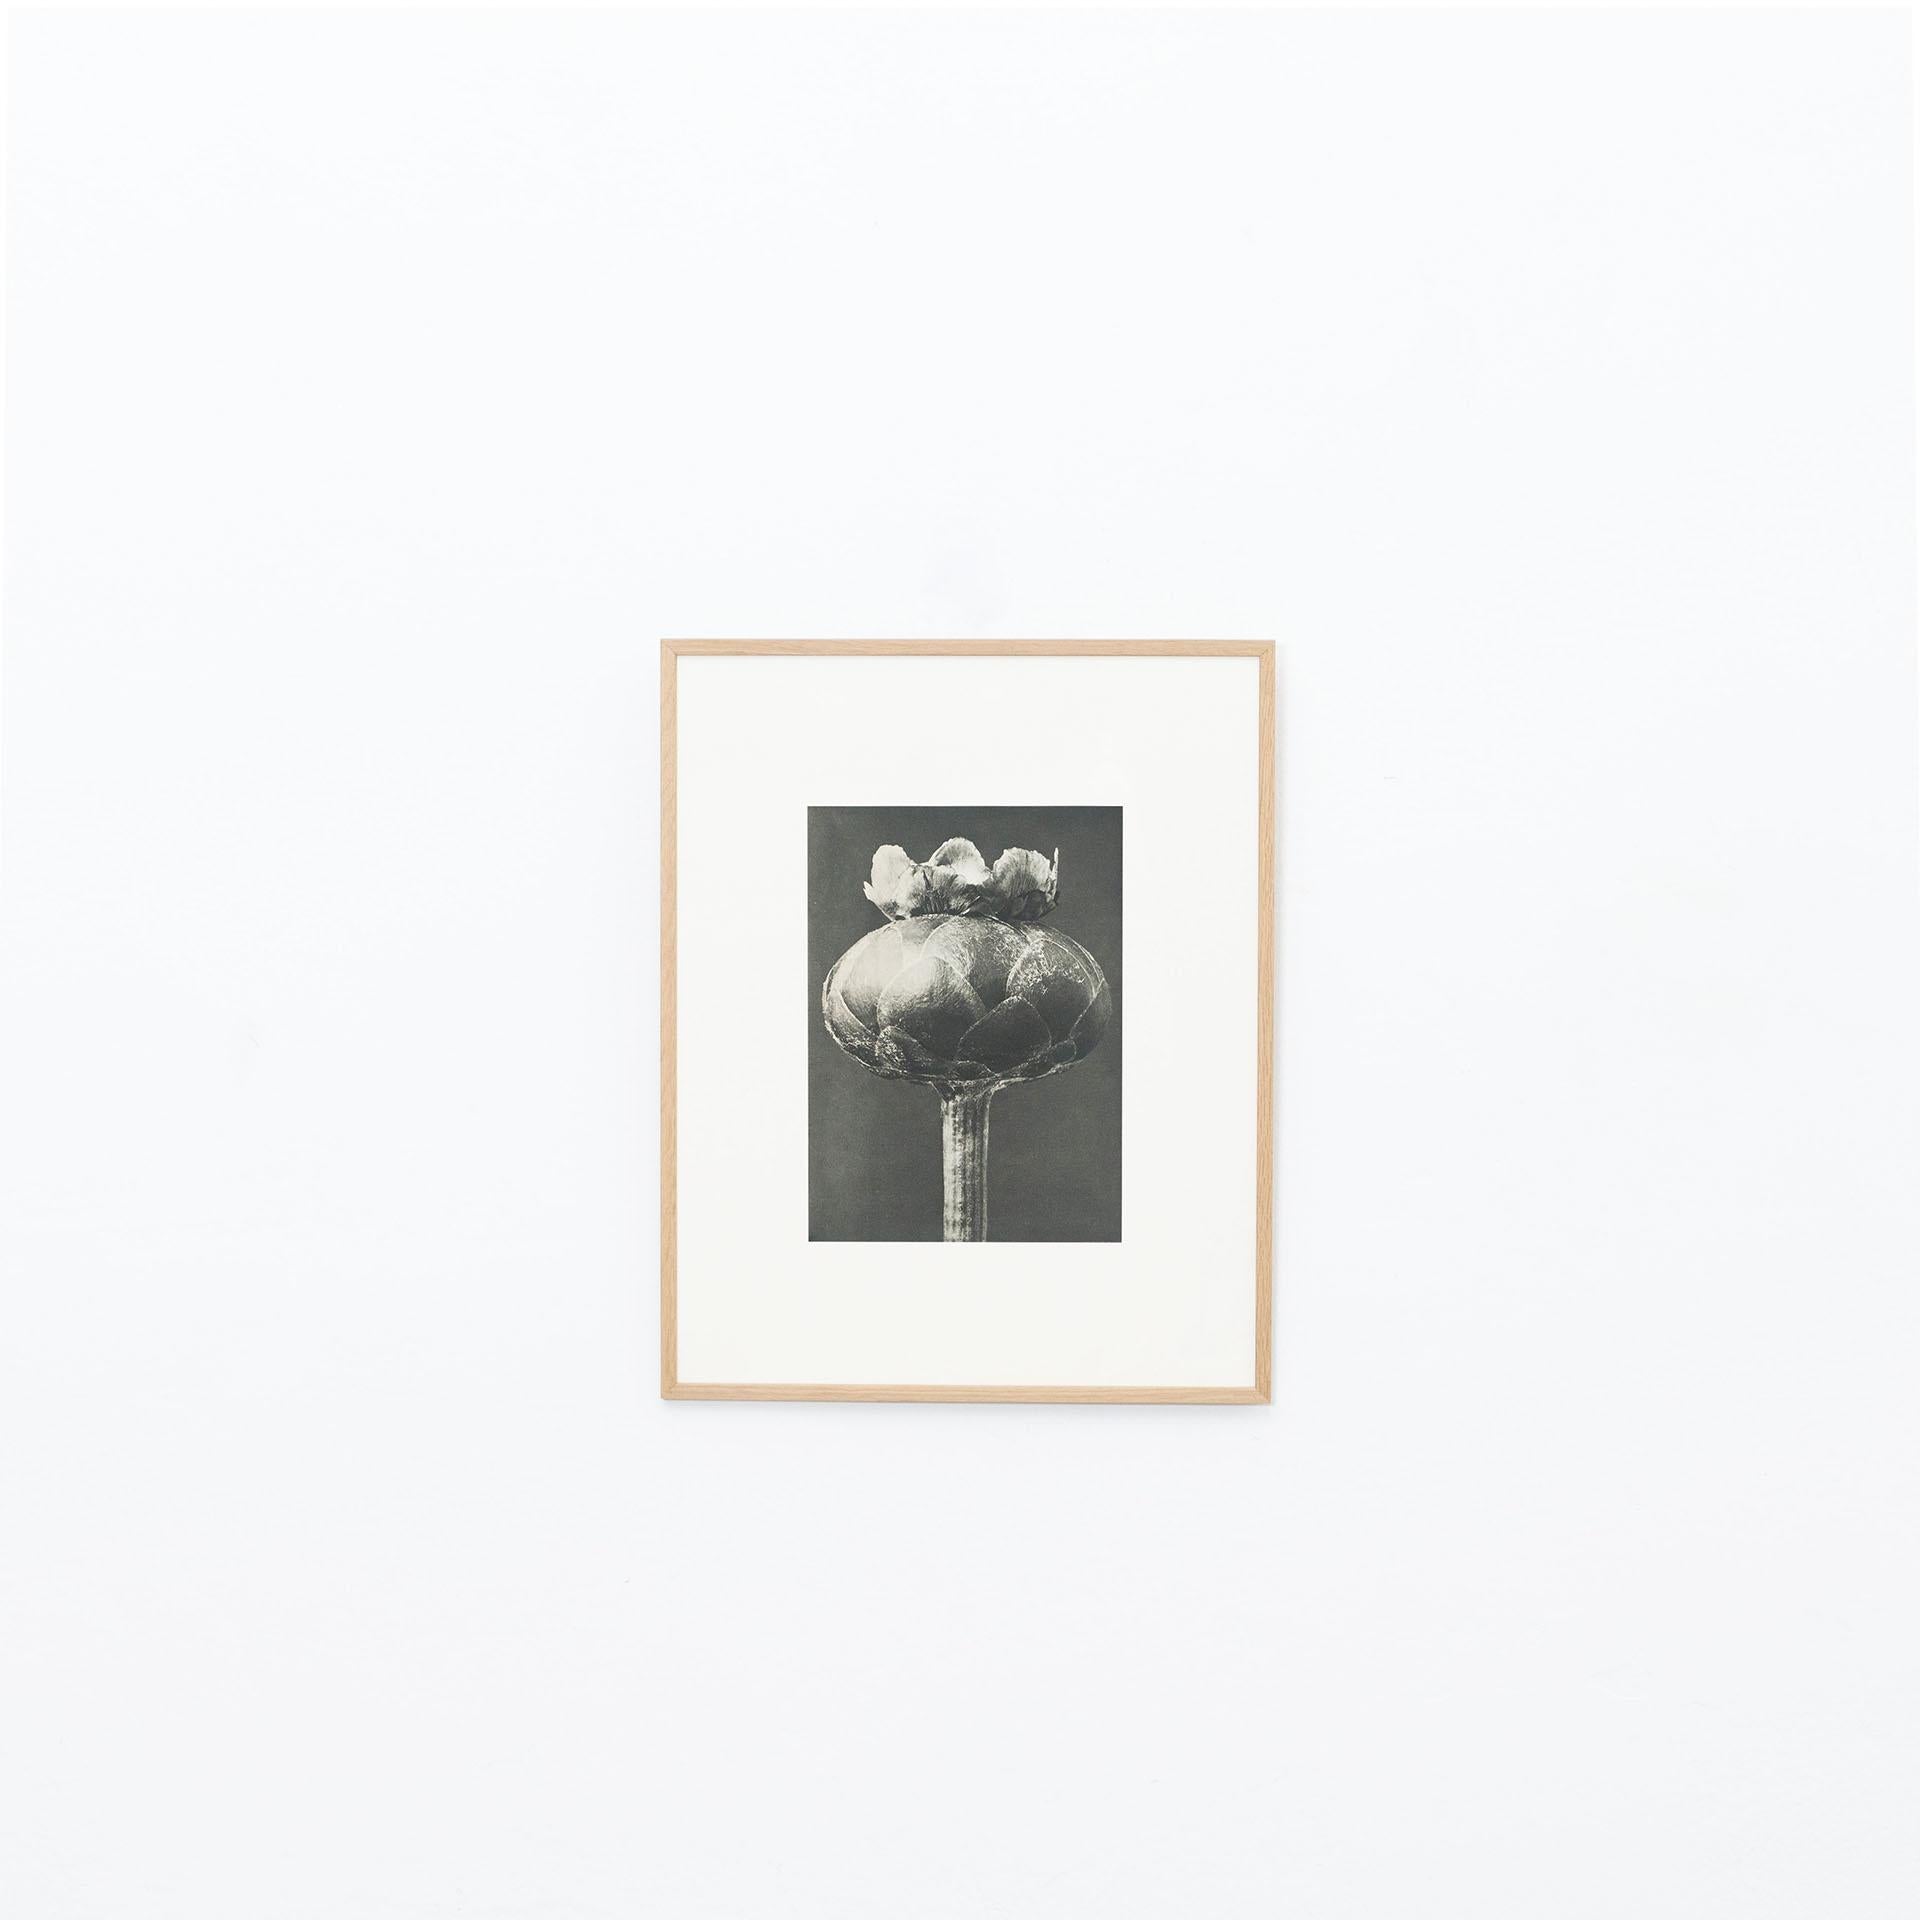 Karl Blossfeldt Photogravure from the edition of the book 'Wunder in der Natur' in 1942.

Photography number 43. 
In original condition, with minor wear consistent with age and use, preserving a beautiful patina.

Karl Blossfeldt (June 13, 1865